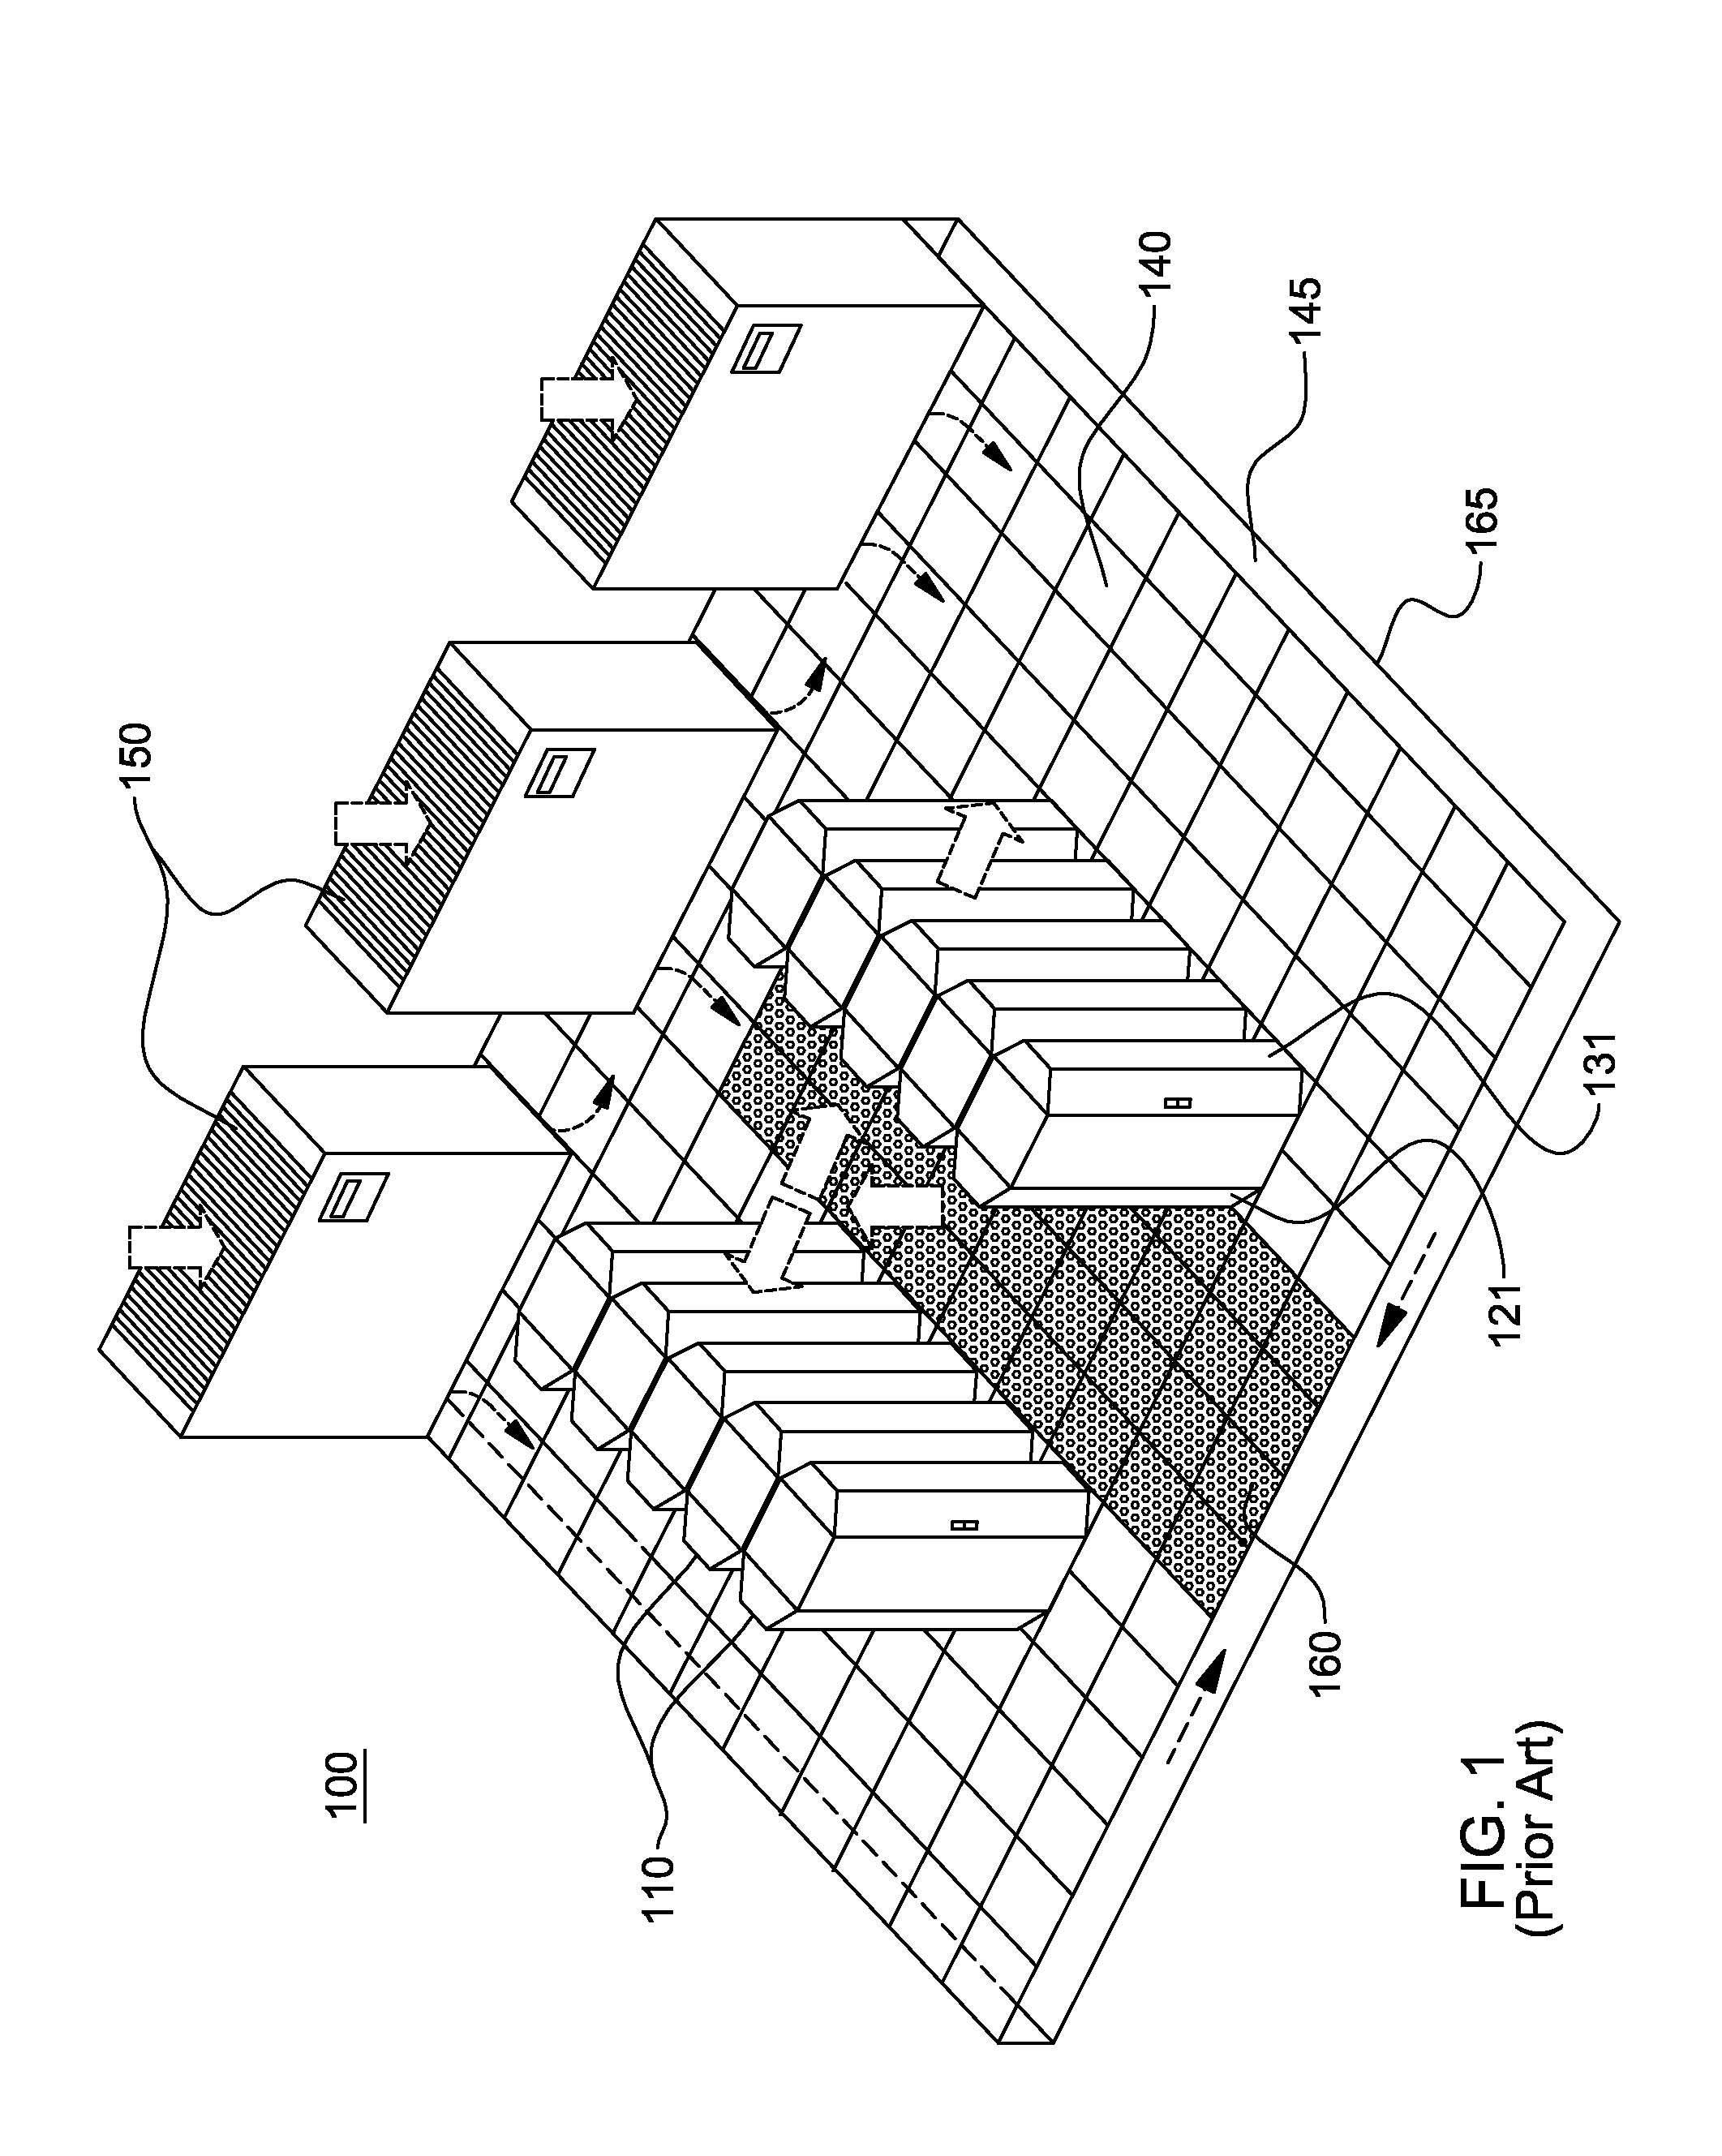 Monitoring method and system for determining rack airflow rate and rack power consumption